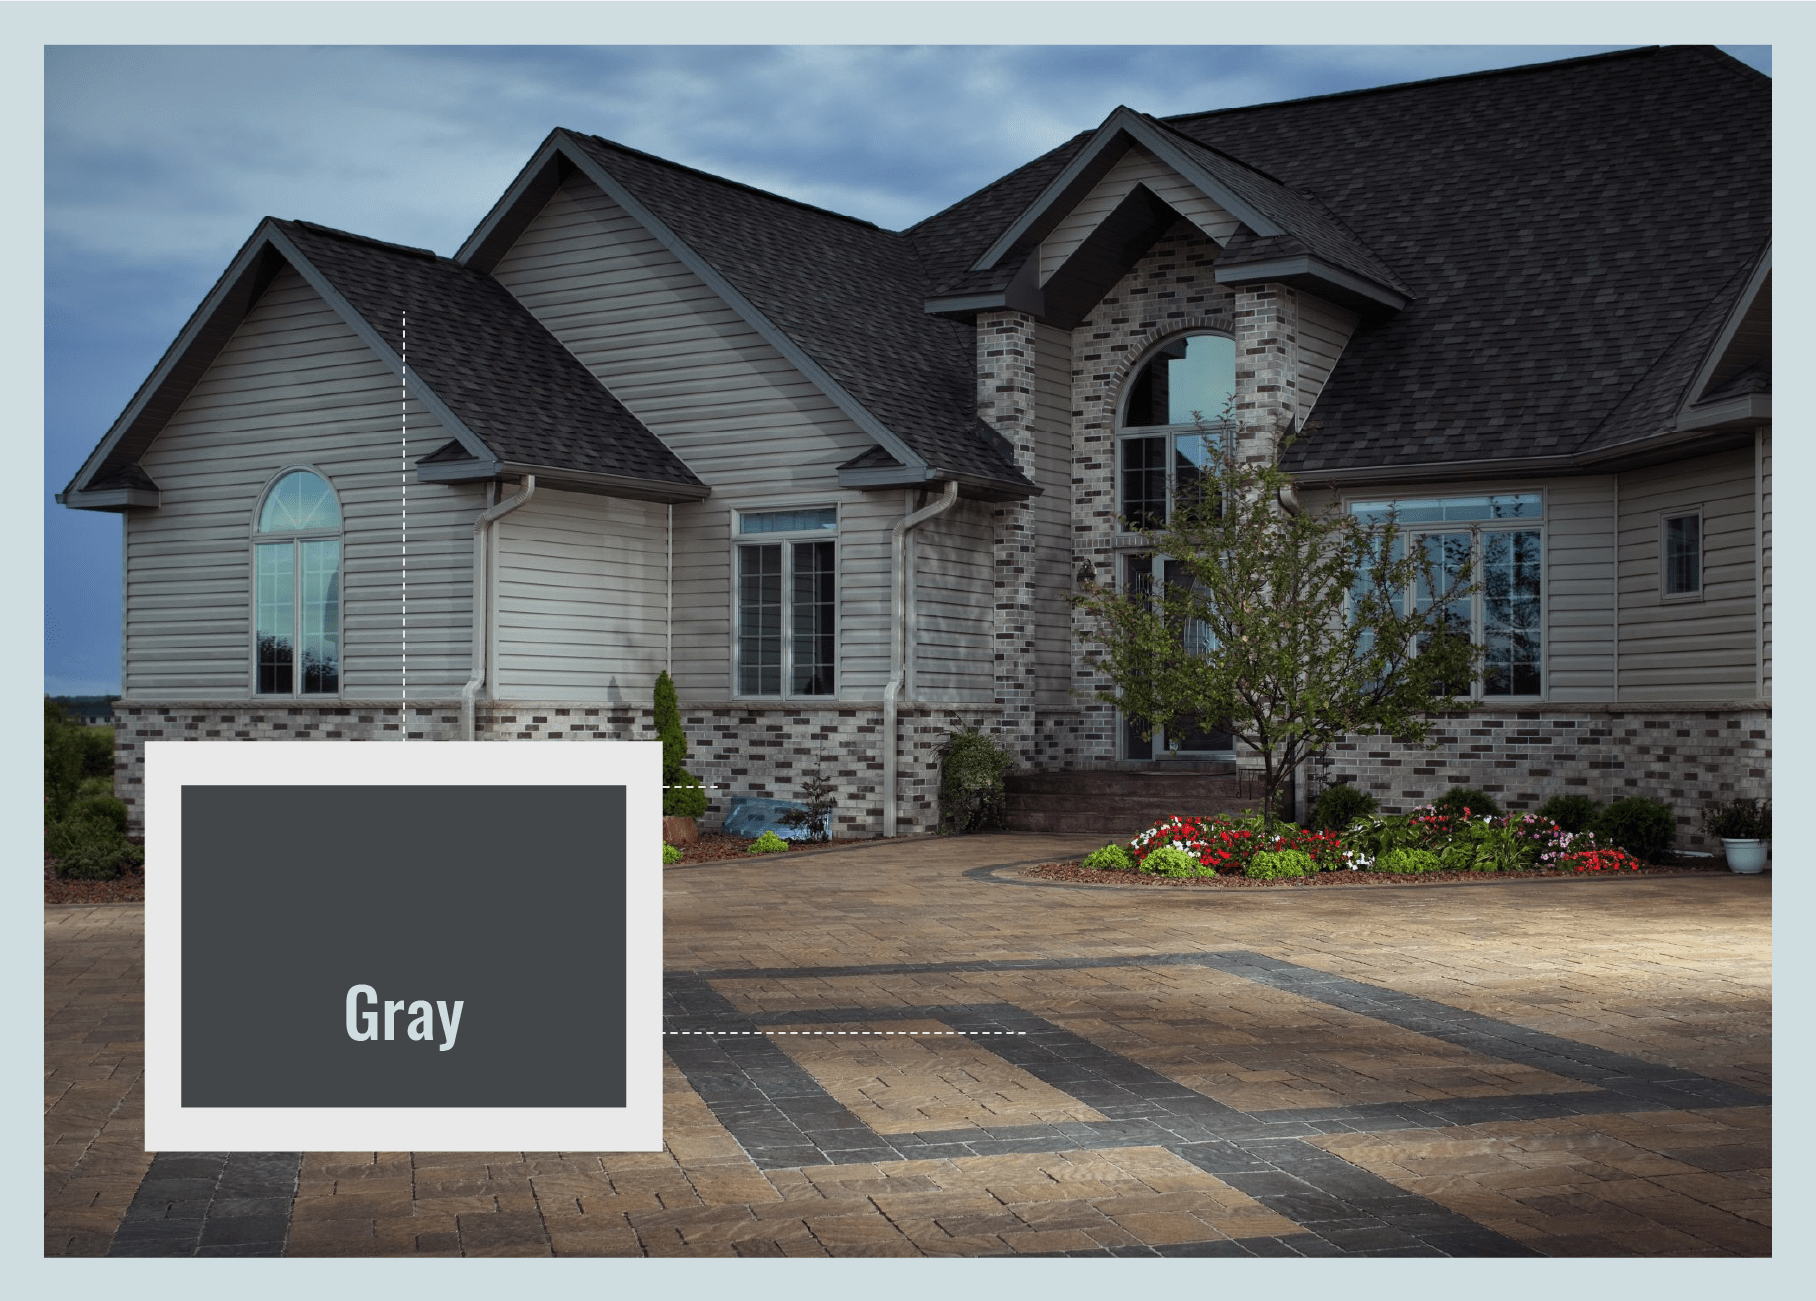 gray accent pavers matched with roof